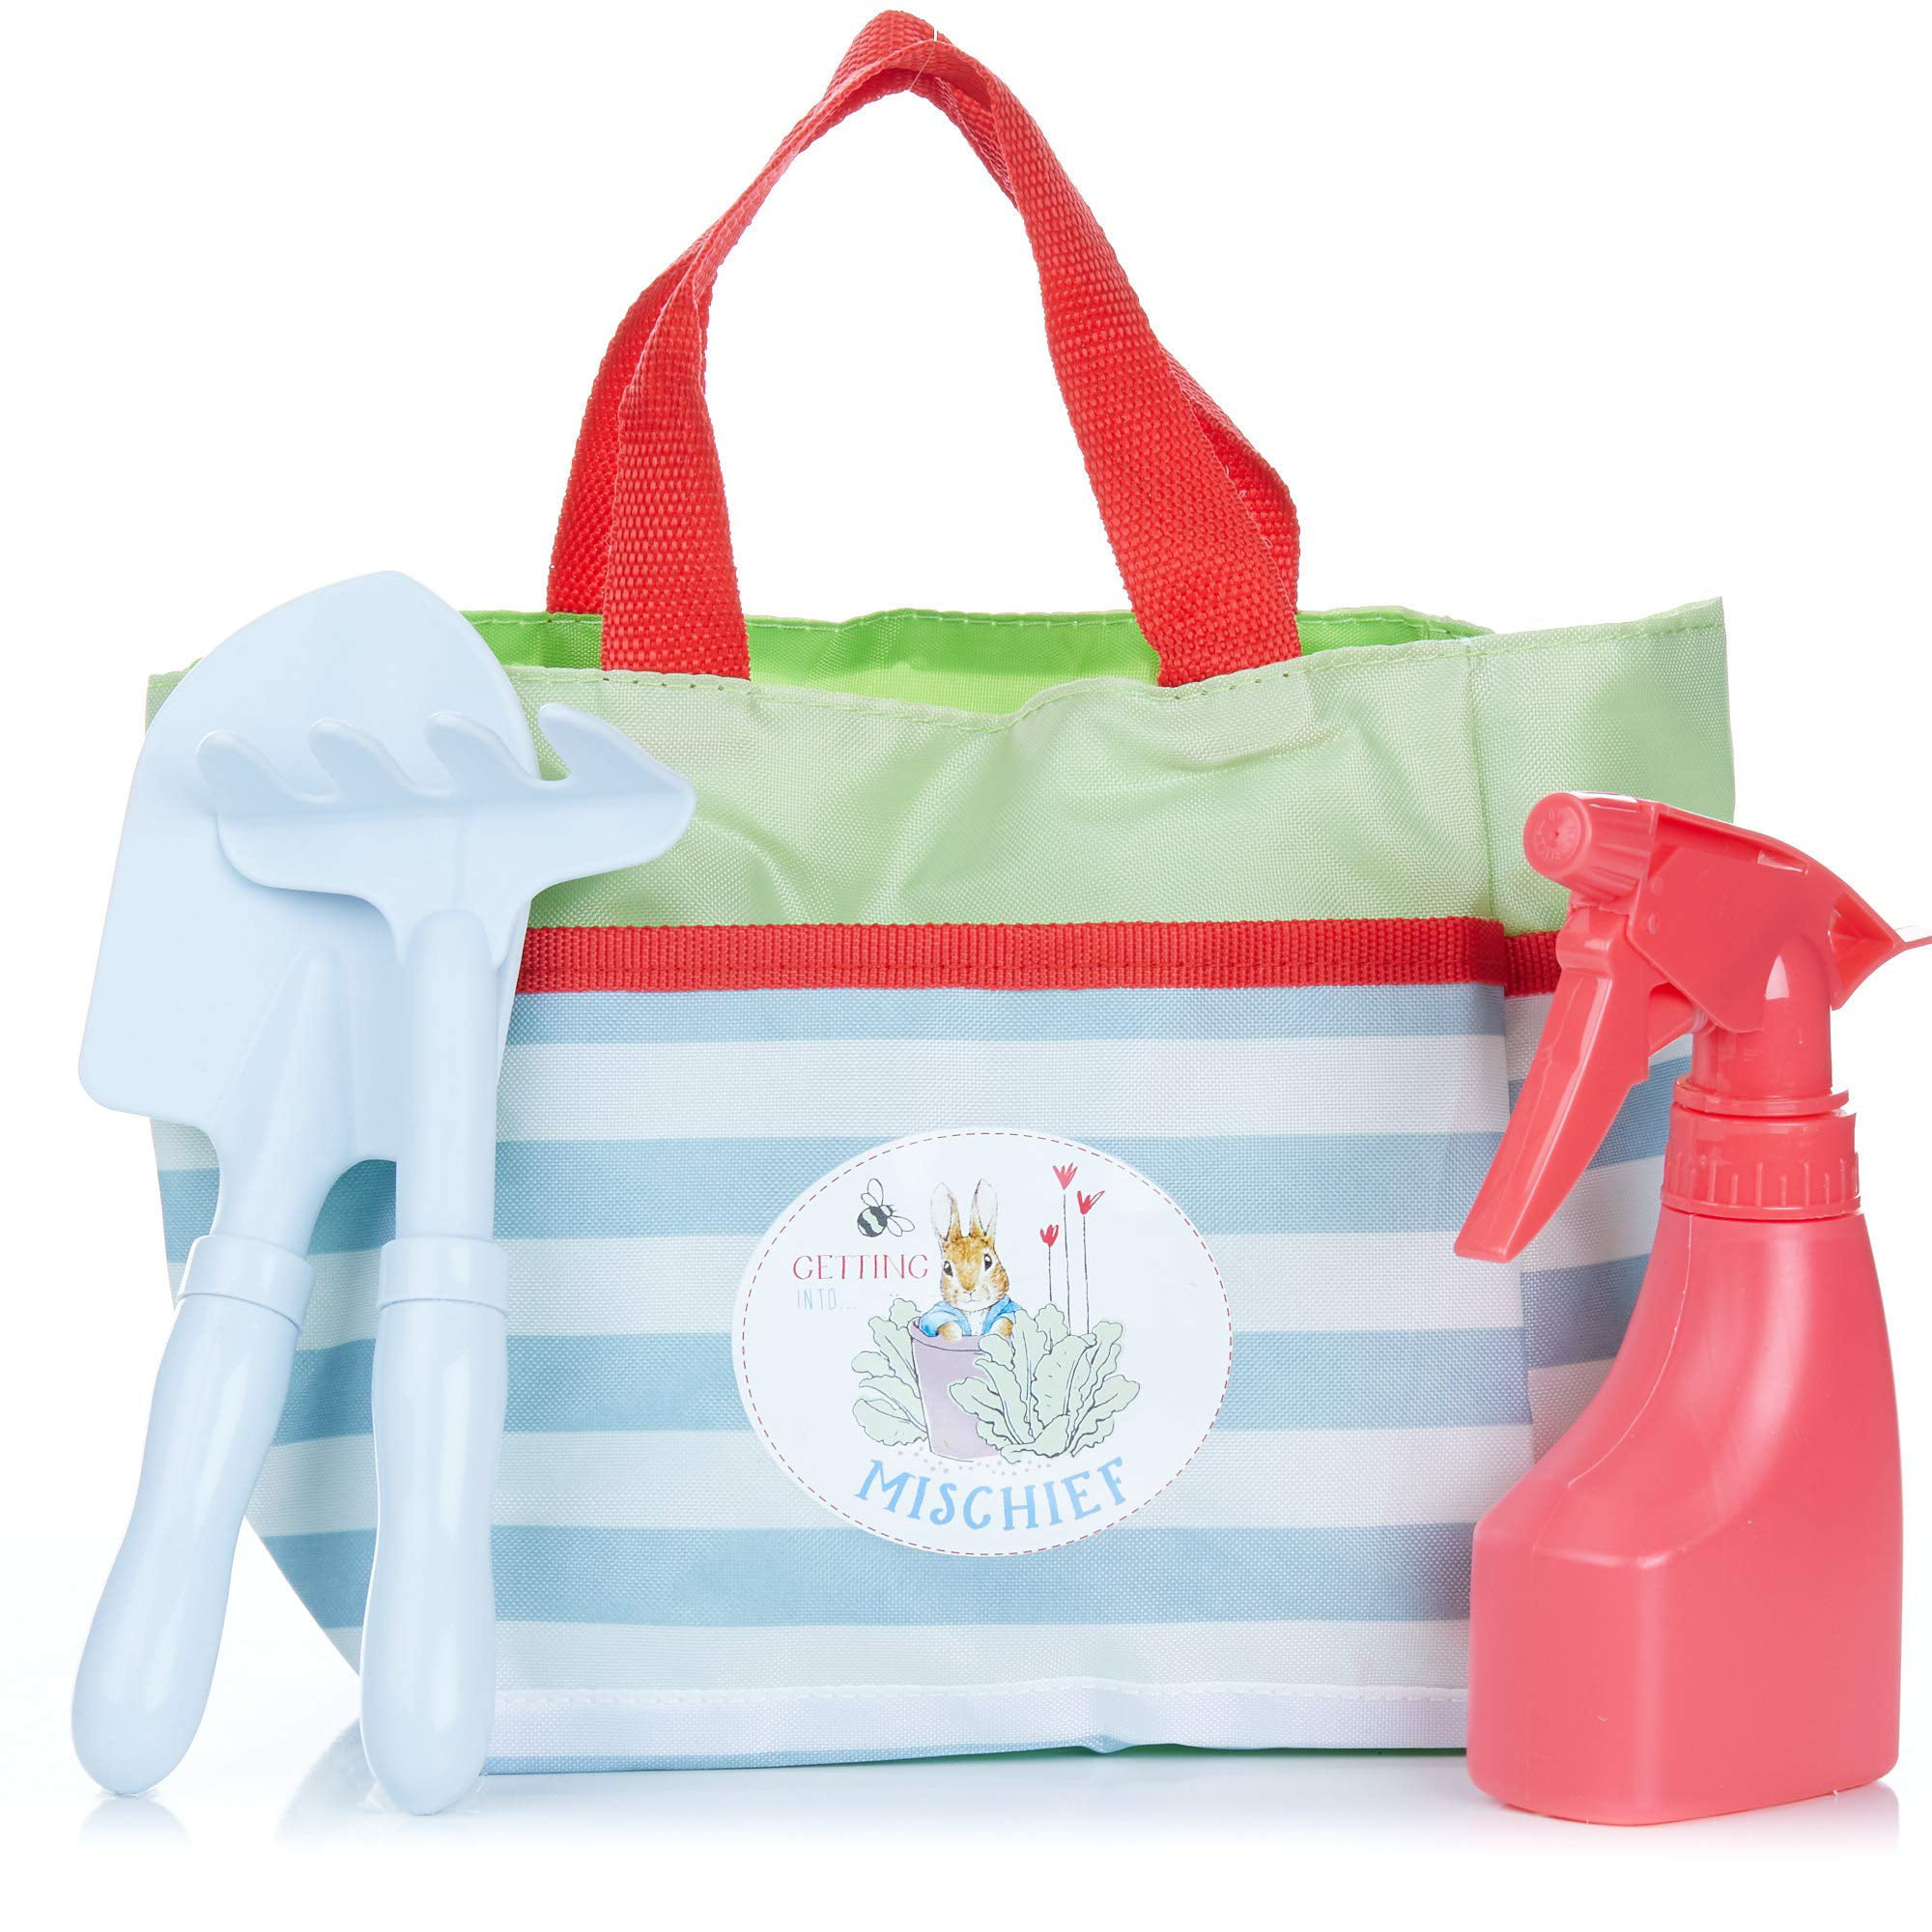 Peter Rabbit Garden Tote Bag with Accessories for Kids